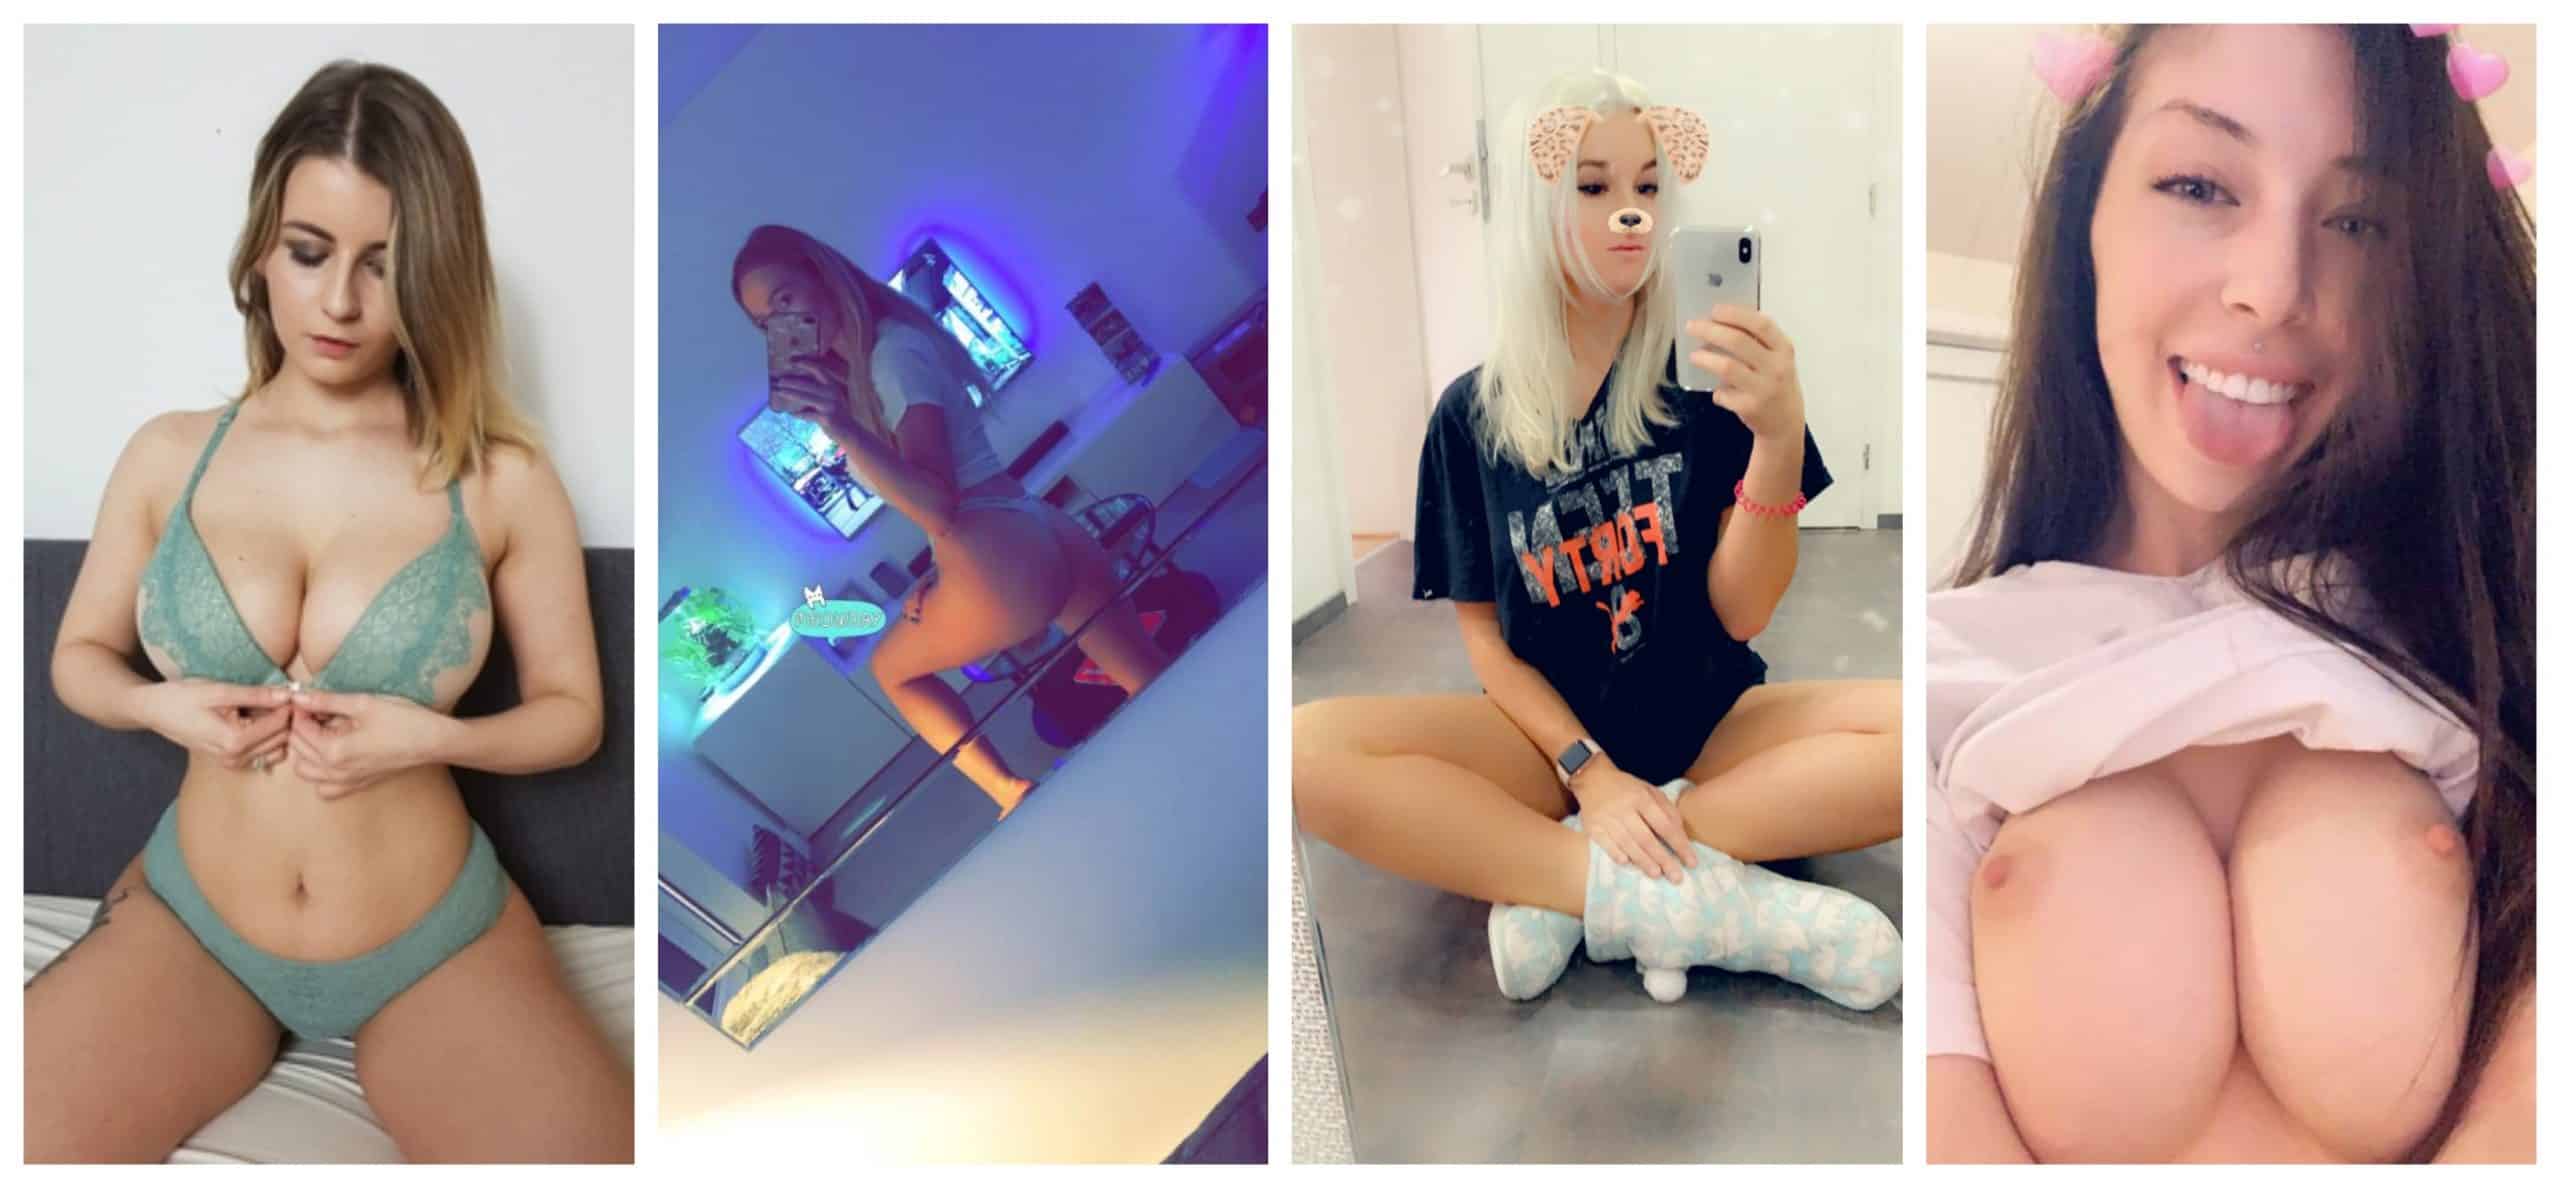 SnapperBabes Premium Snapchat Review (with leaked snaps) .